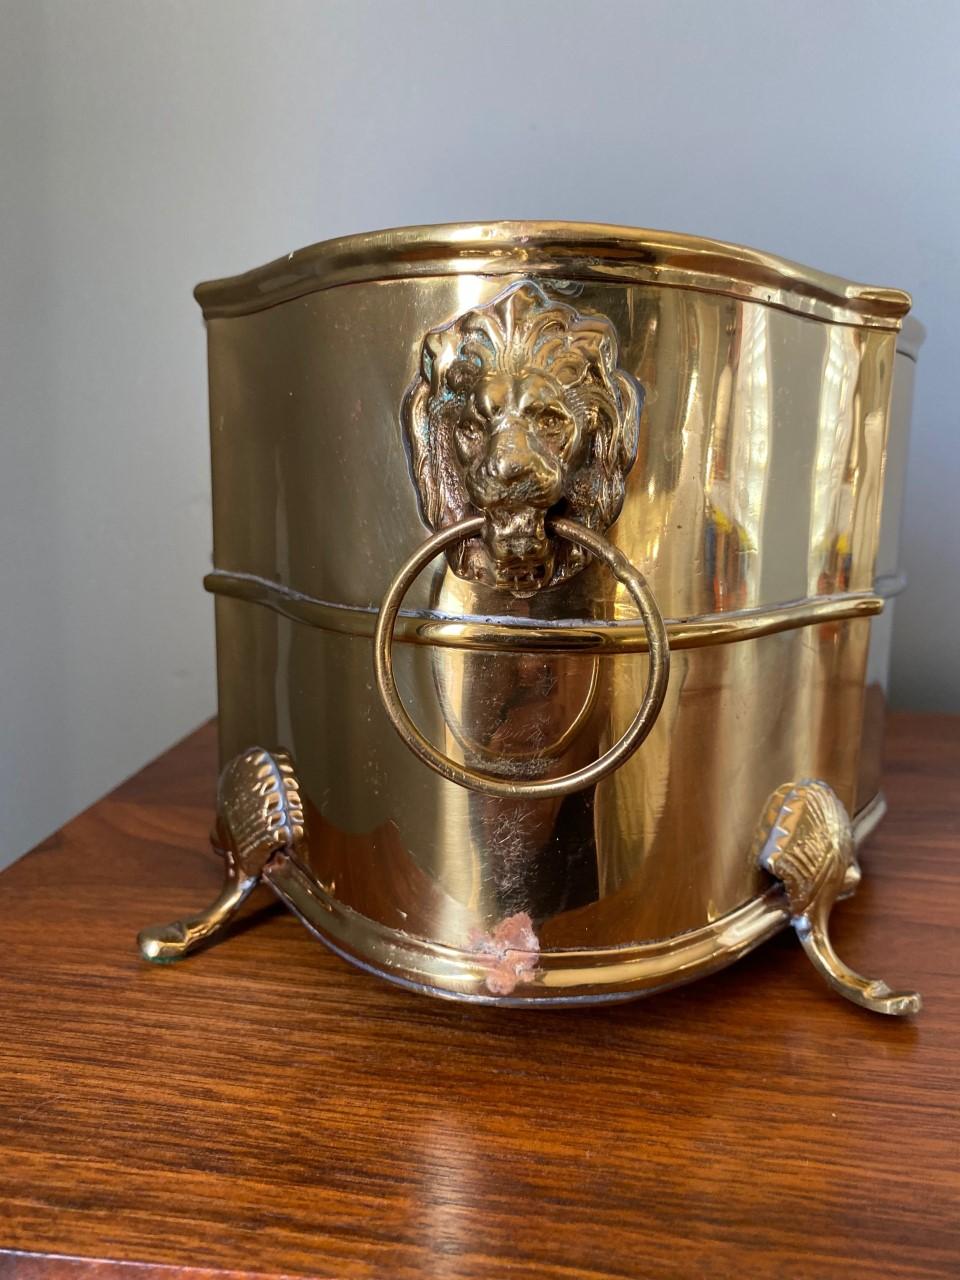 Antique Brass Jardiniere Planter with Lion Head and Feet Details For Sale 2